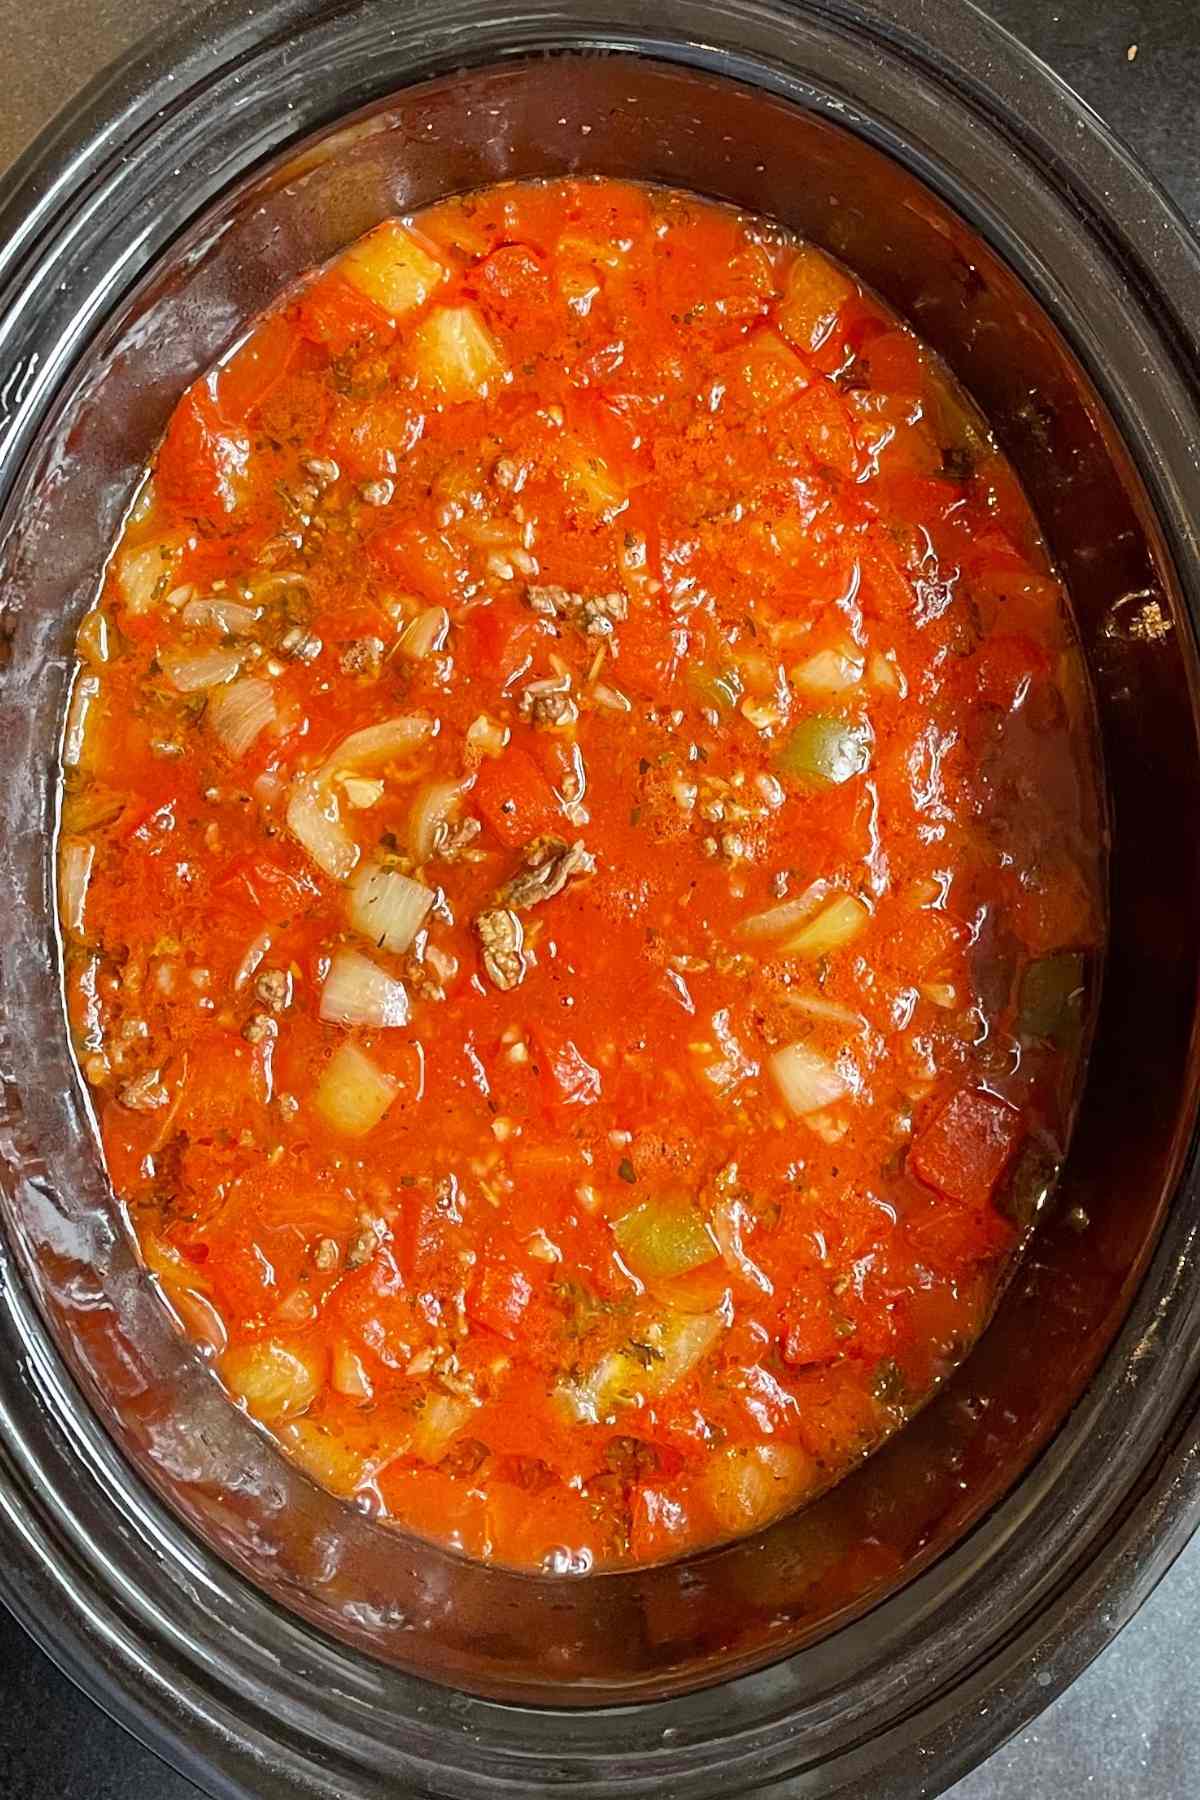 The finished soup in the slow cooker after cooking